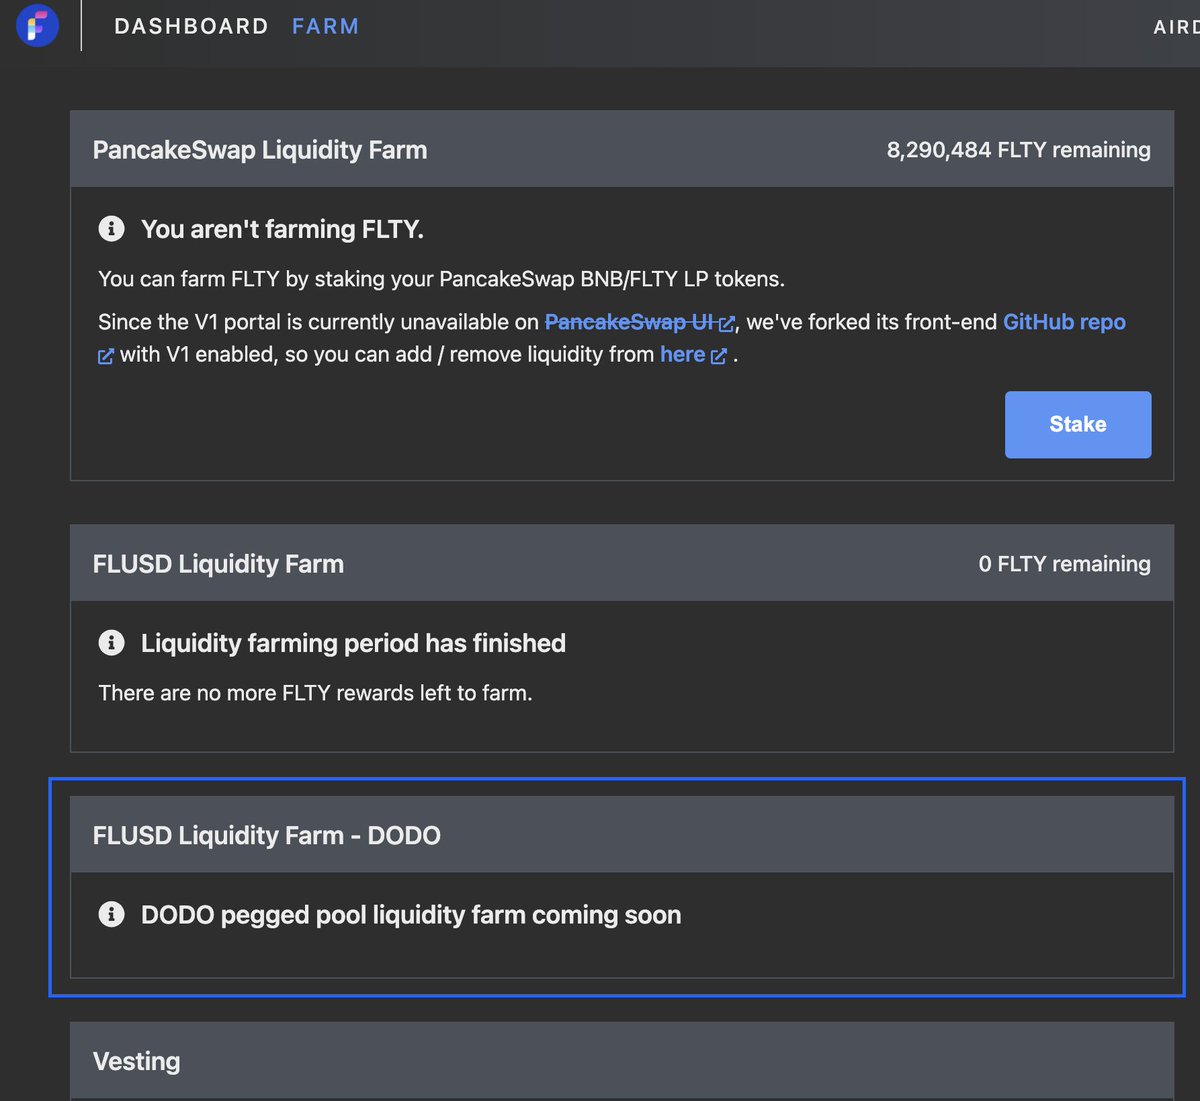 Coming soon on fluity.finance/#/farm $FLUSD Liquidity Farm DODO pegged pool liquidity farm 👀 More details and info on release soon. Follow us on Twitter/Telegram/Discord to stay up to date. t.me/fluity discord.gg/etvyP53Sdc #Fluity #BSC #LiquidityMining #DeFi